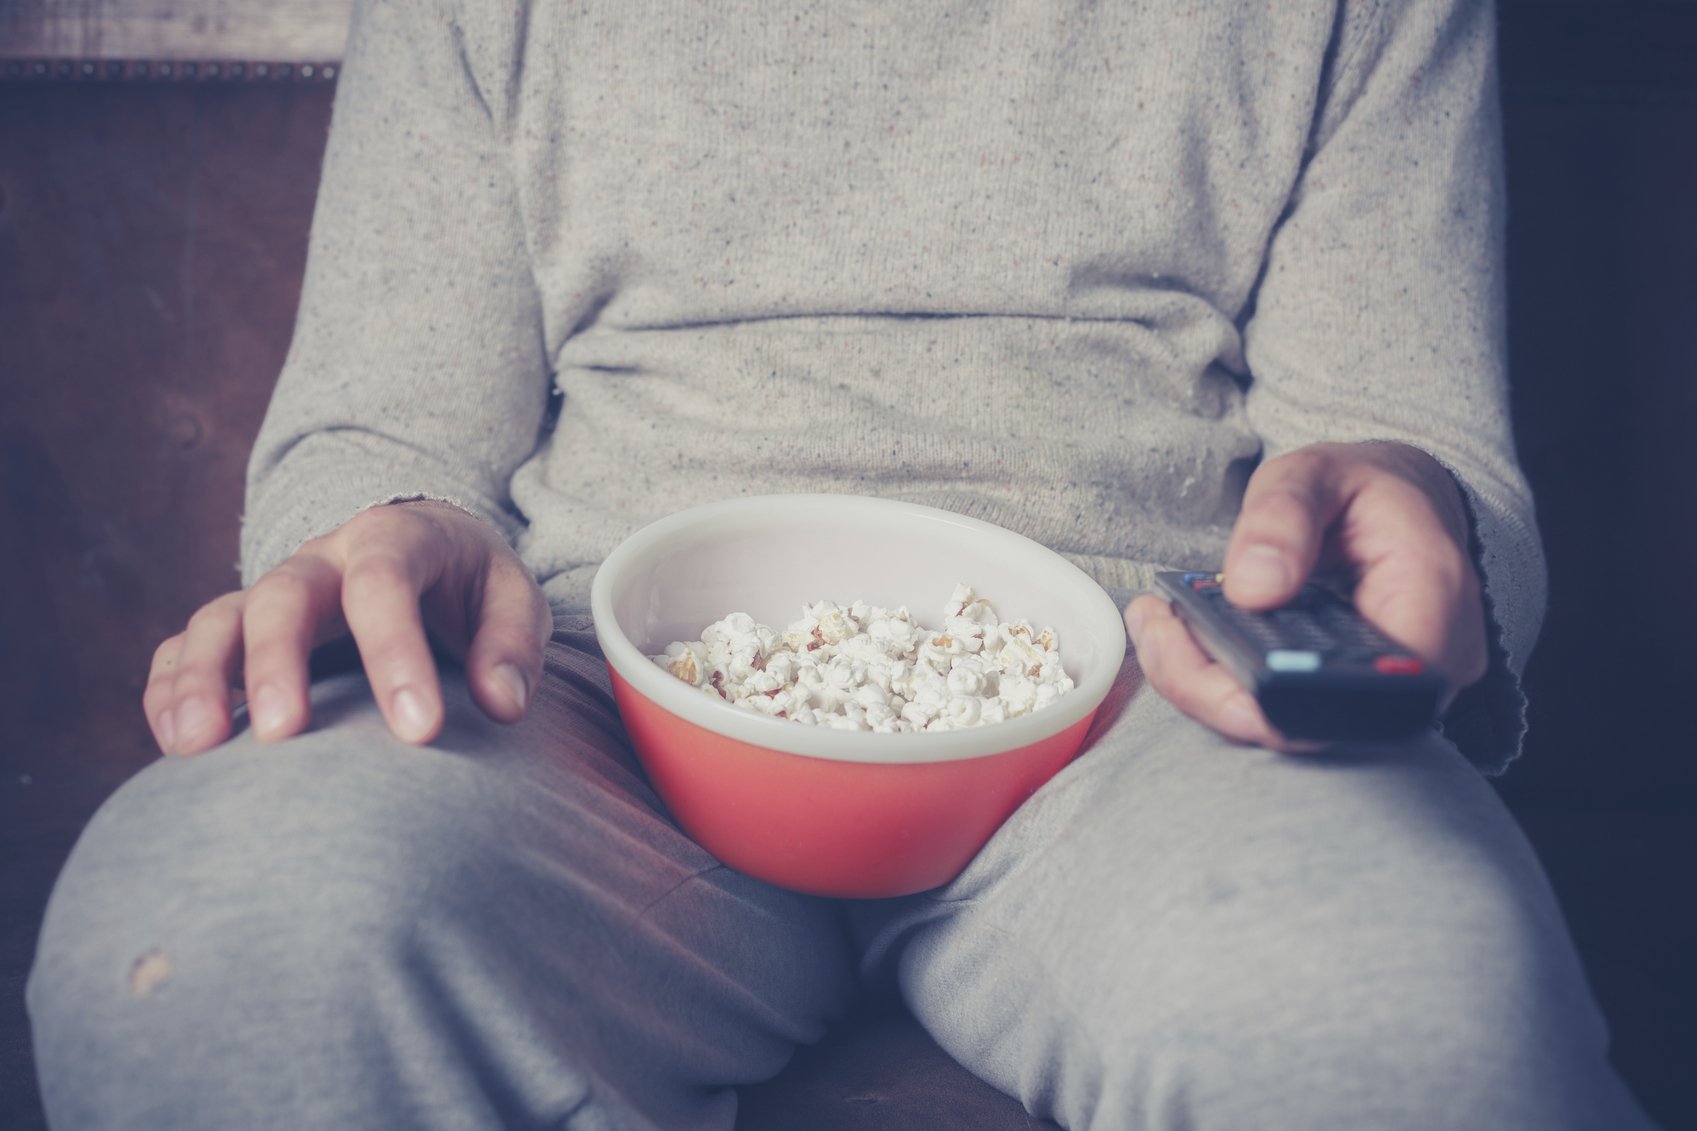 couch potato: Young man is sitting on a sofa and eating popcorn while watching television